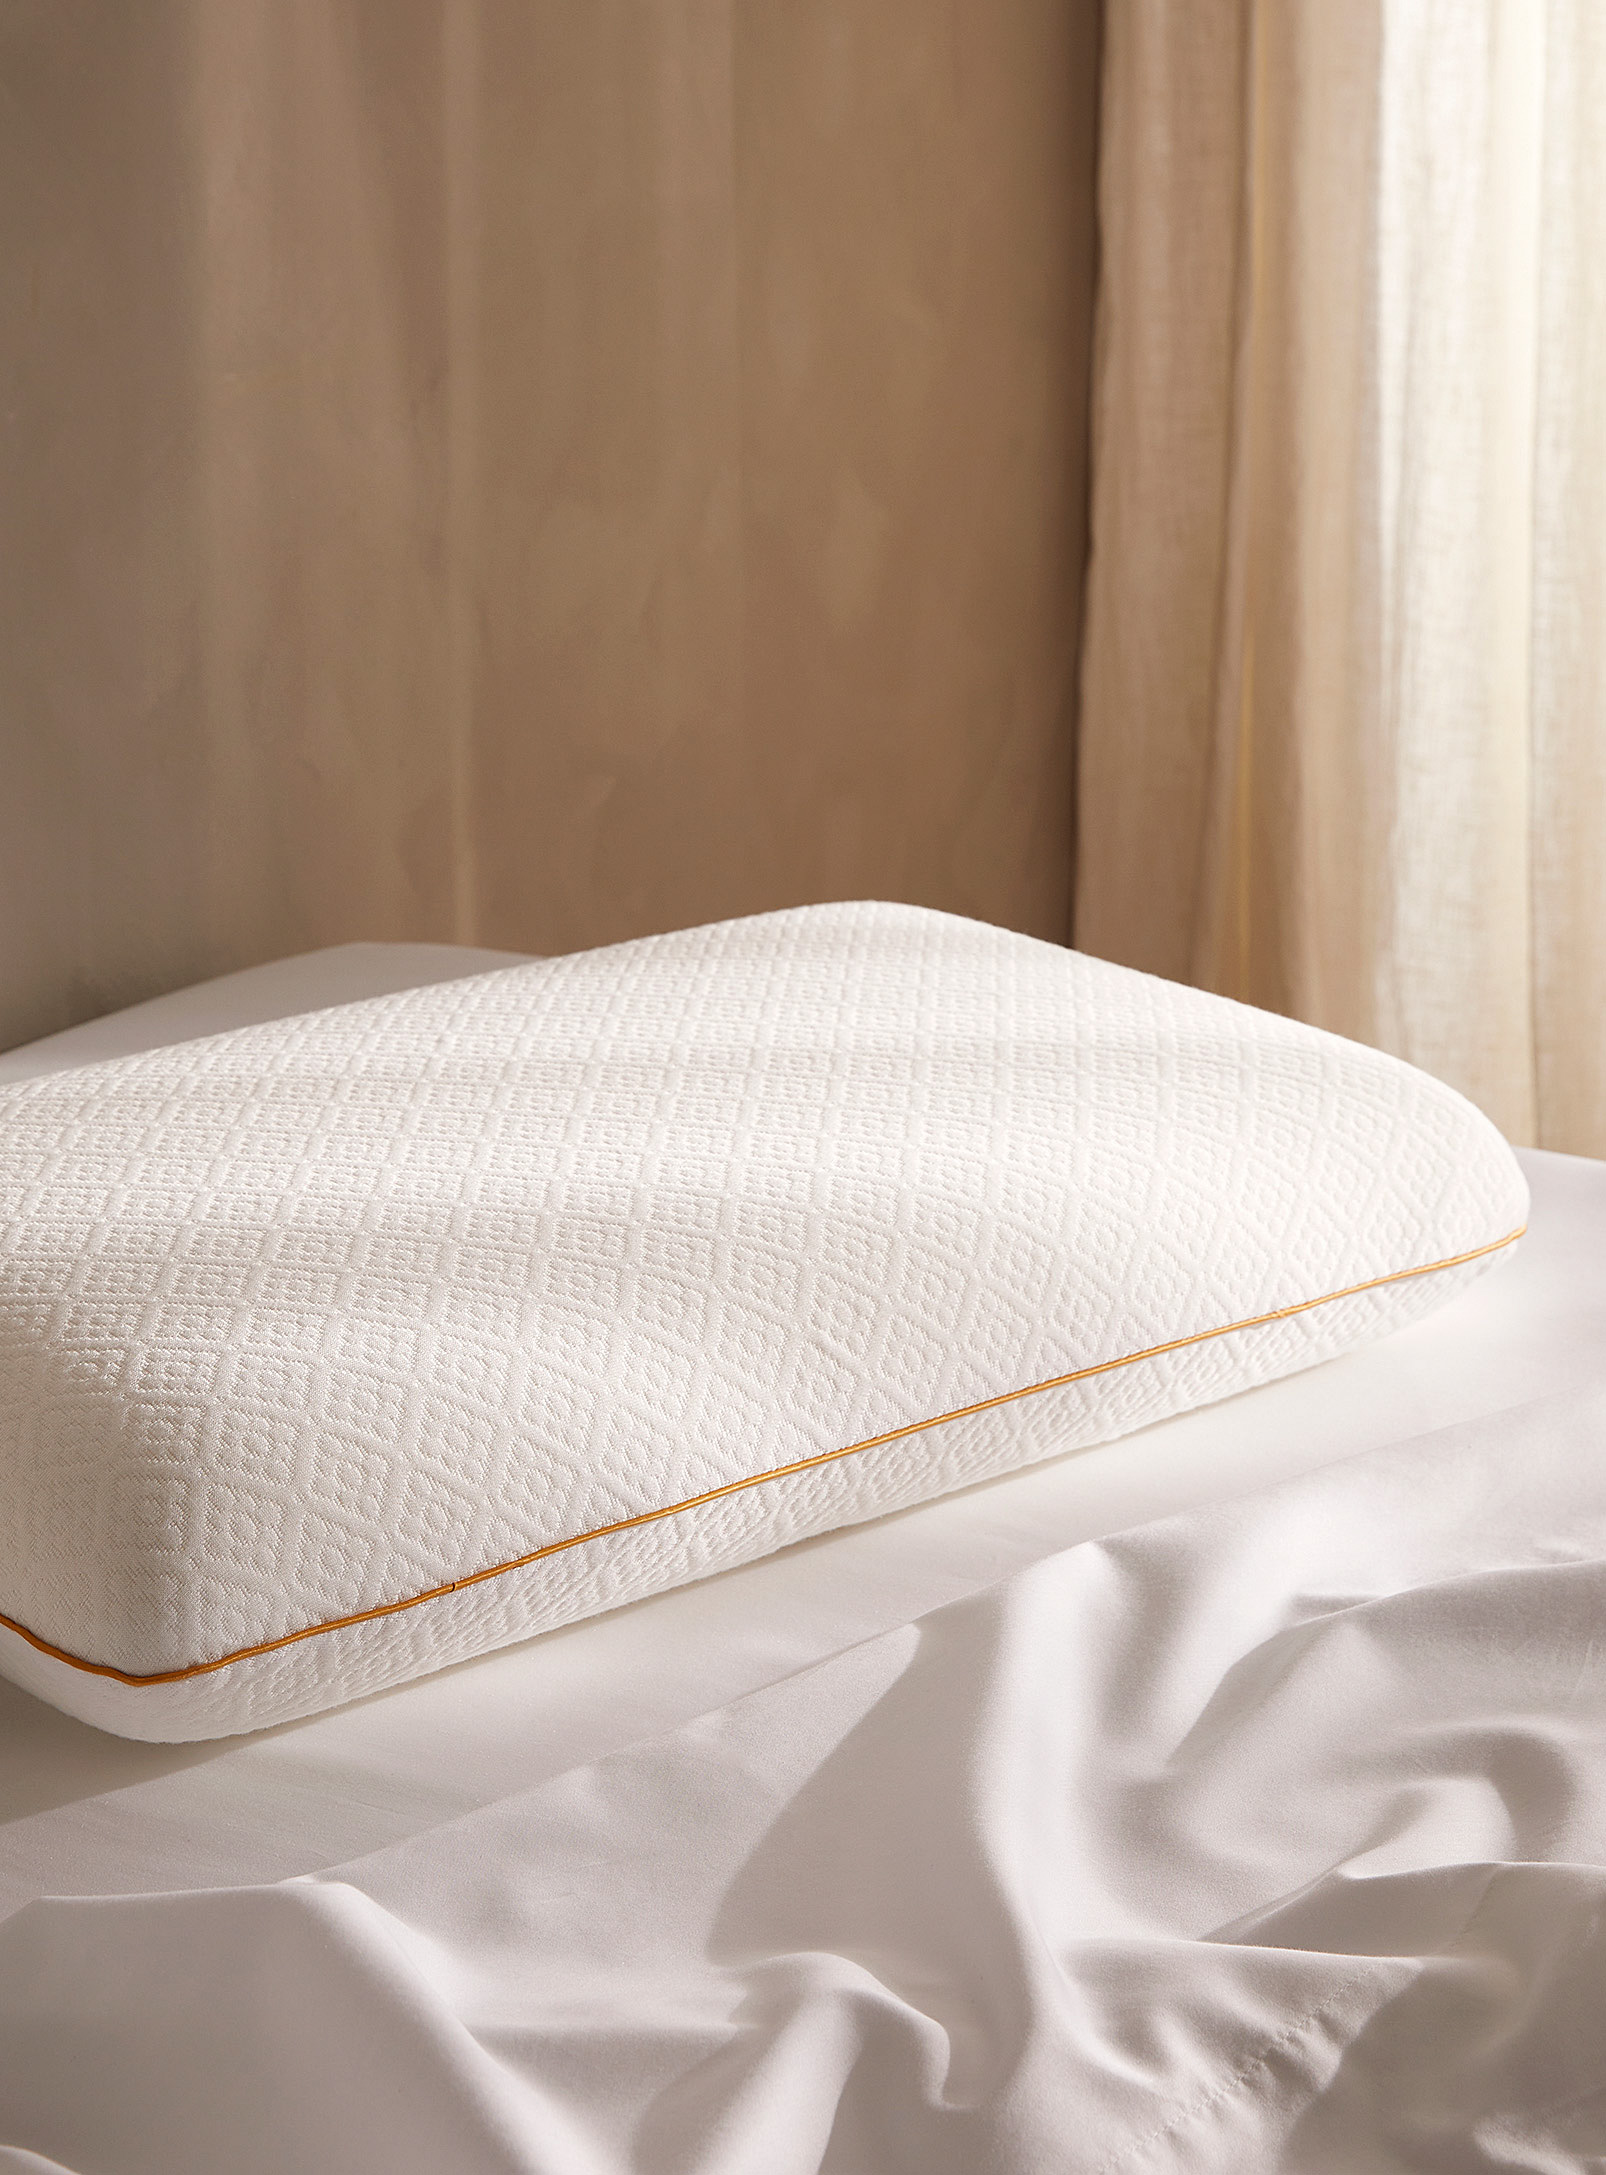 Simons Maison Soft Memory Foam Pillow Semi-firm Support Queen Size In White